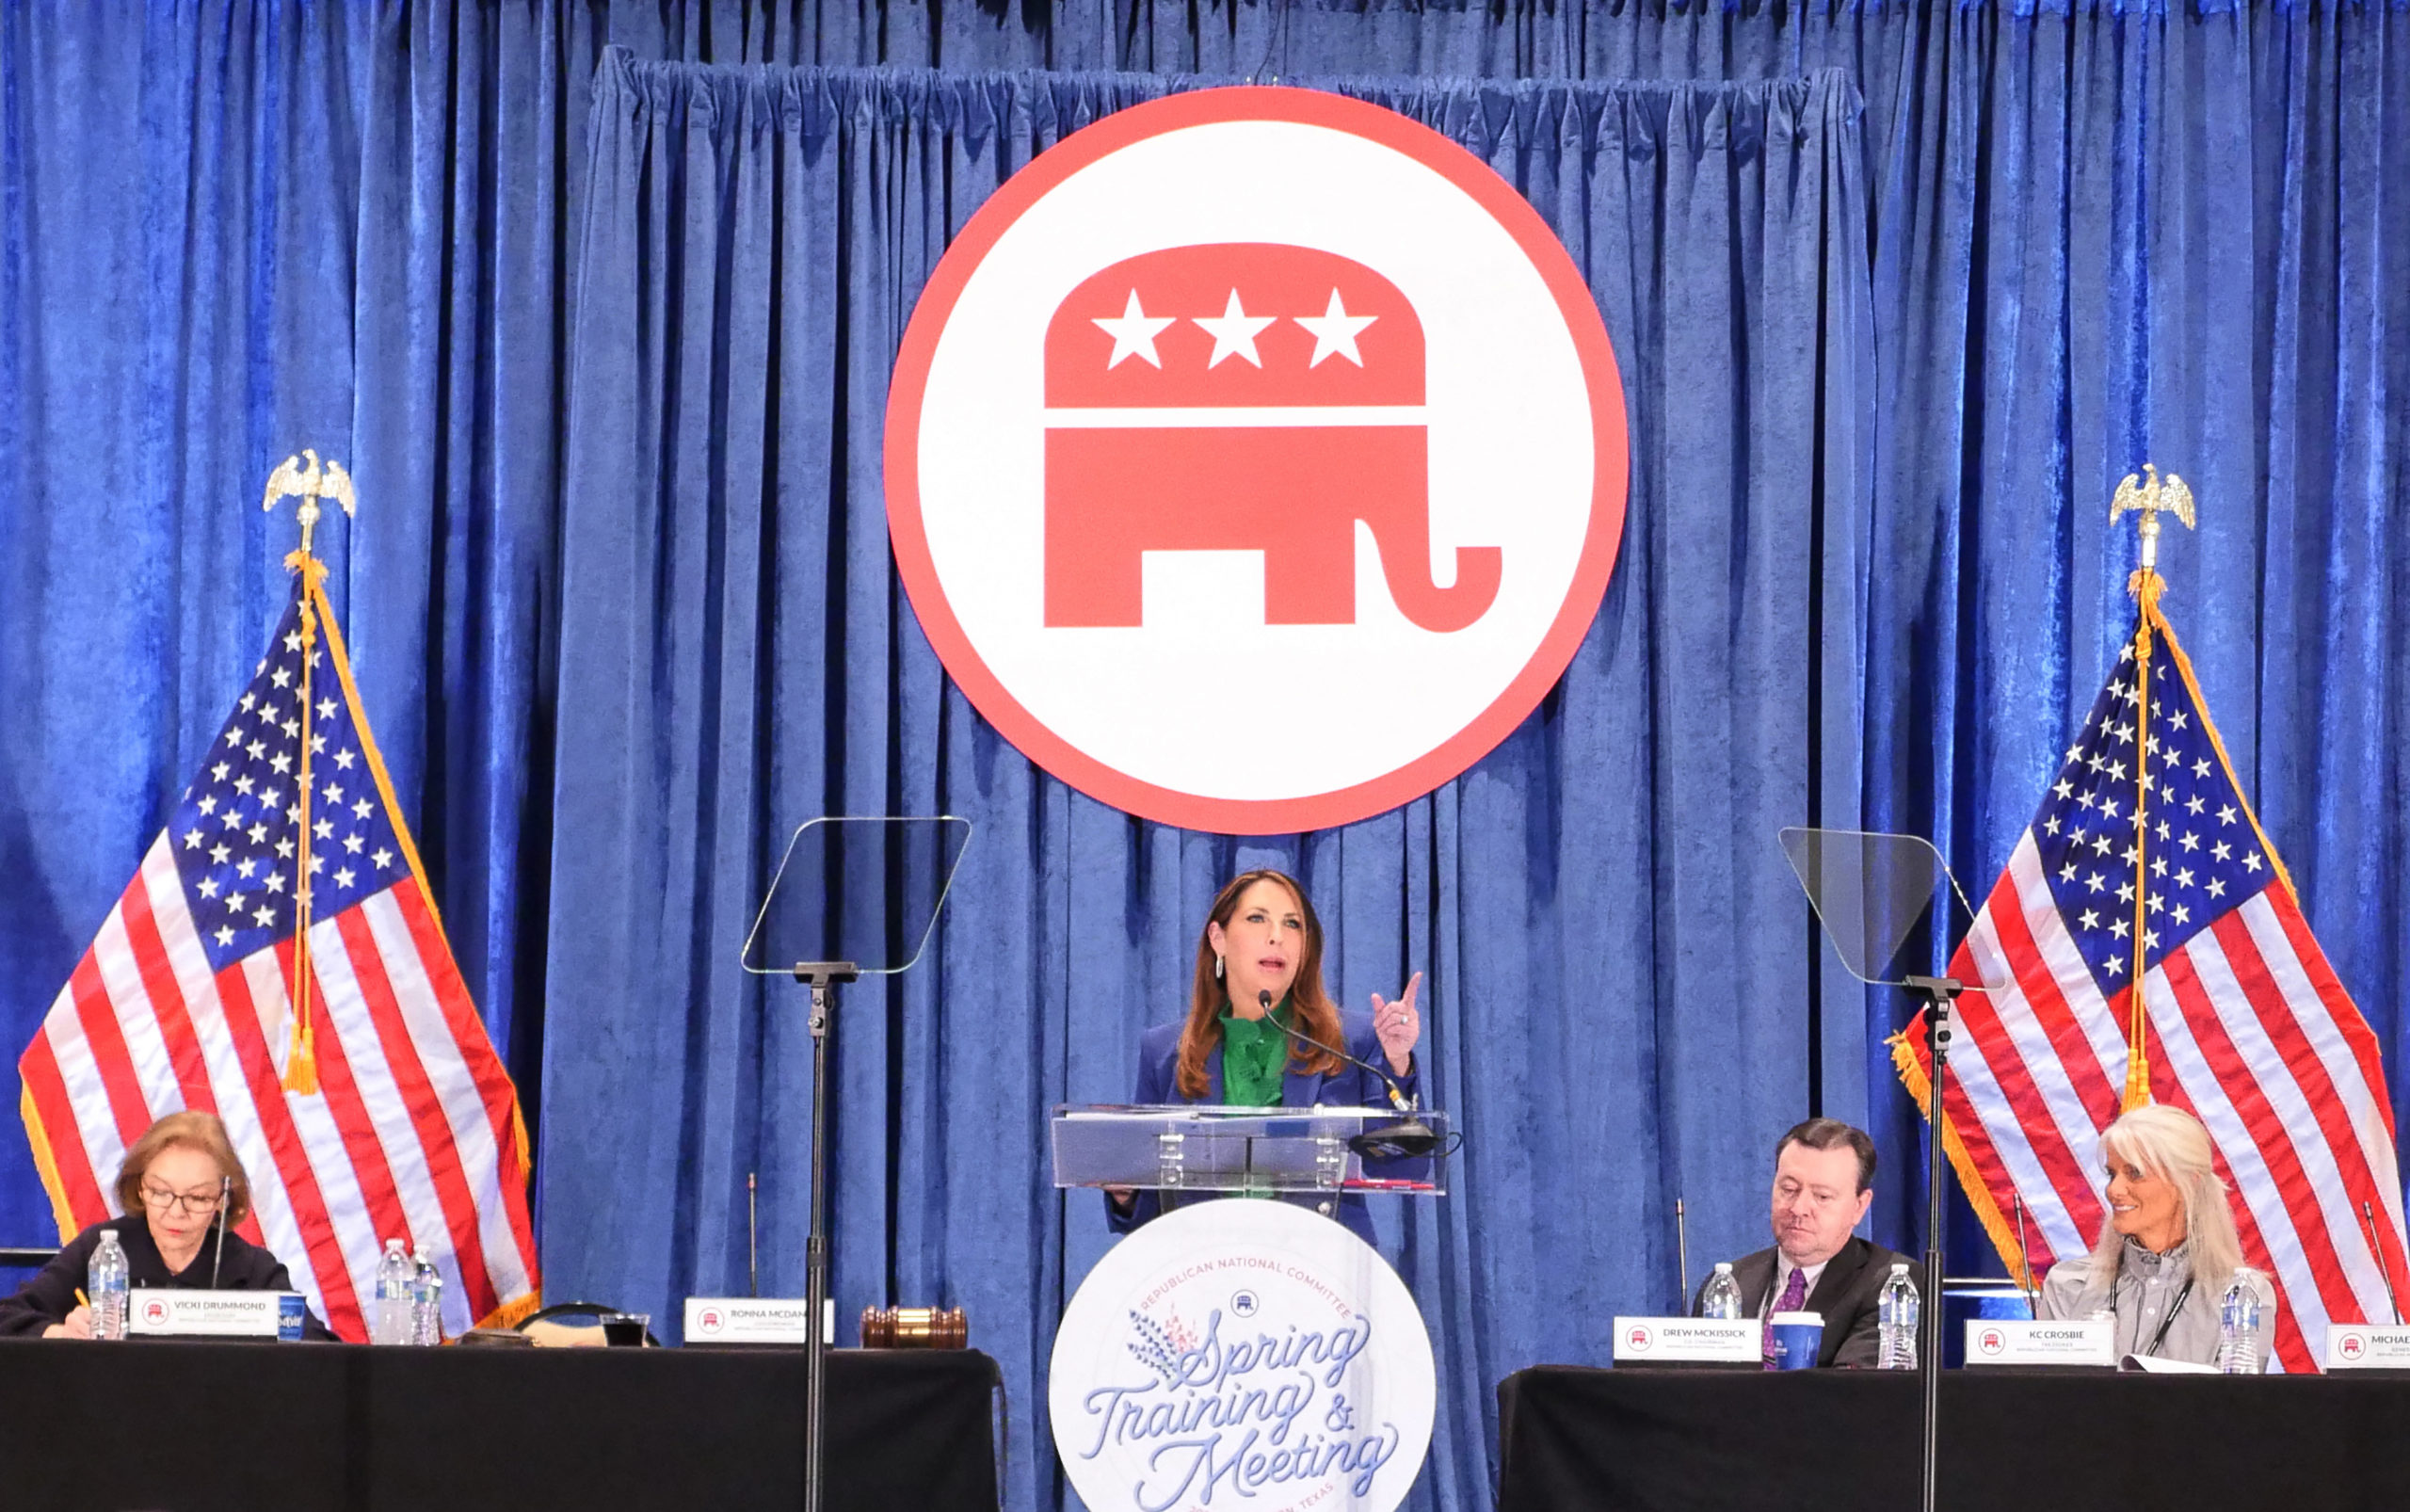 Outgoing Republican National Committee (RNC) Chairwoman Ronna McDaniel speaks at the RNC Spring meeting on March 8, 2024, in Houston, Texas. The RNC elected Lara Trump co-chair of the committee and Michael Whatley as chairman, tightening former US President Donald Trump's grip over the party ahead of the November election. (Photo by CECILE CLOCHERET/AFP via Getty Images)